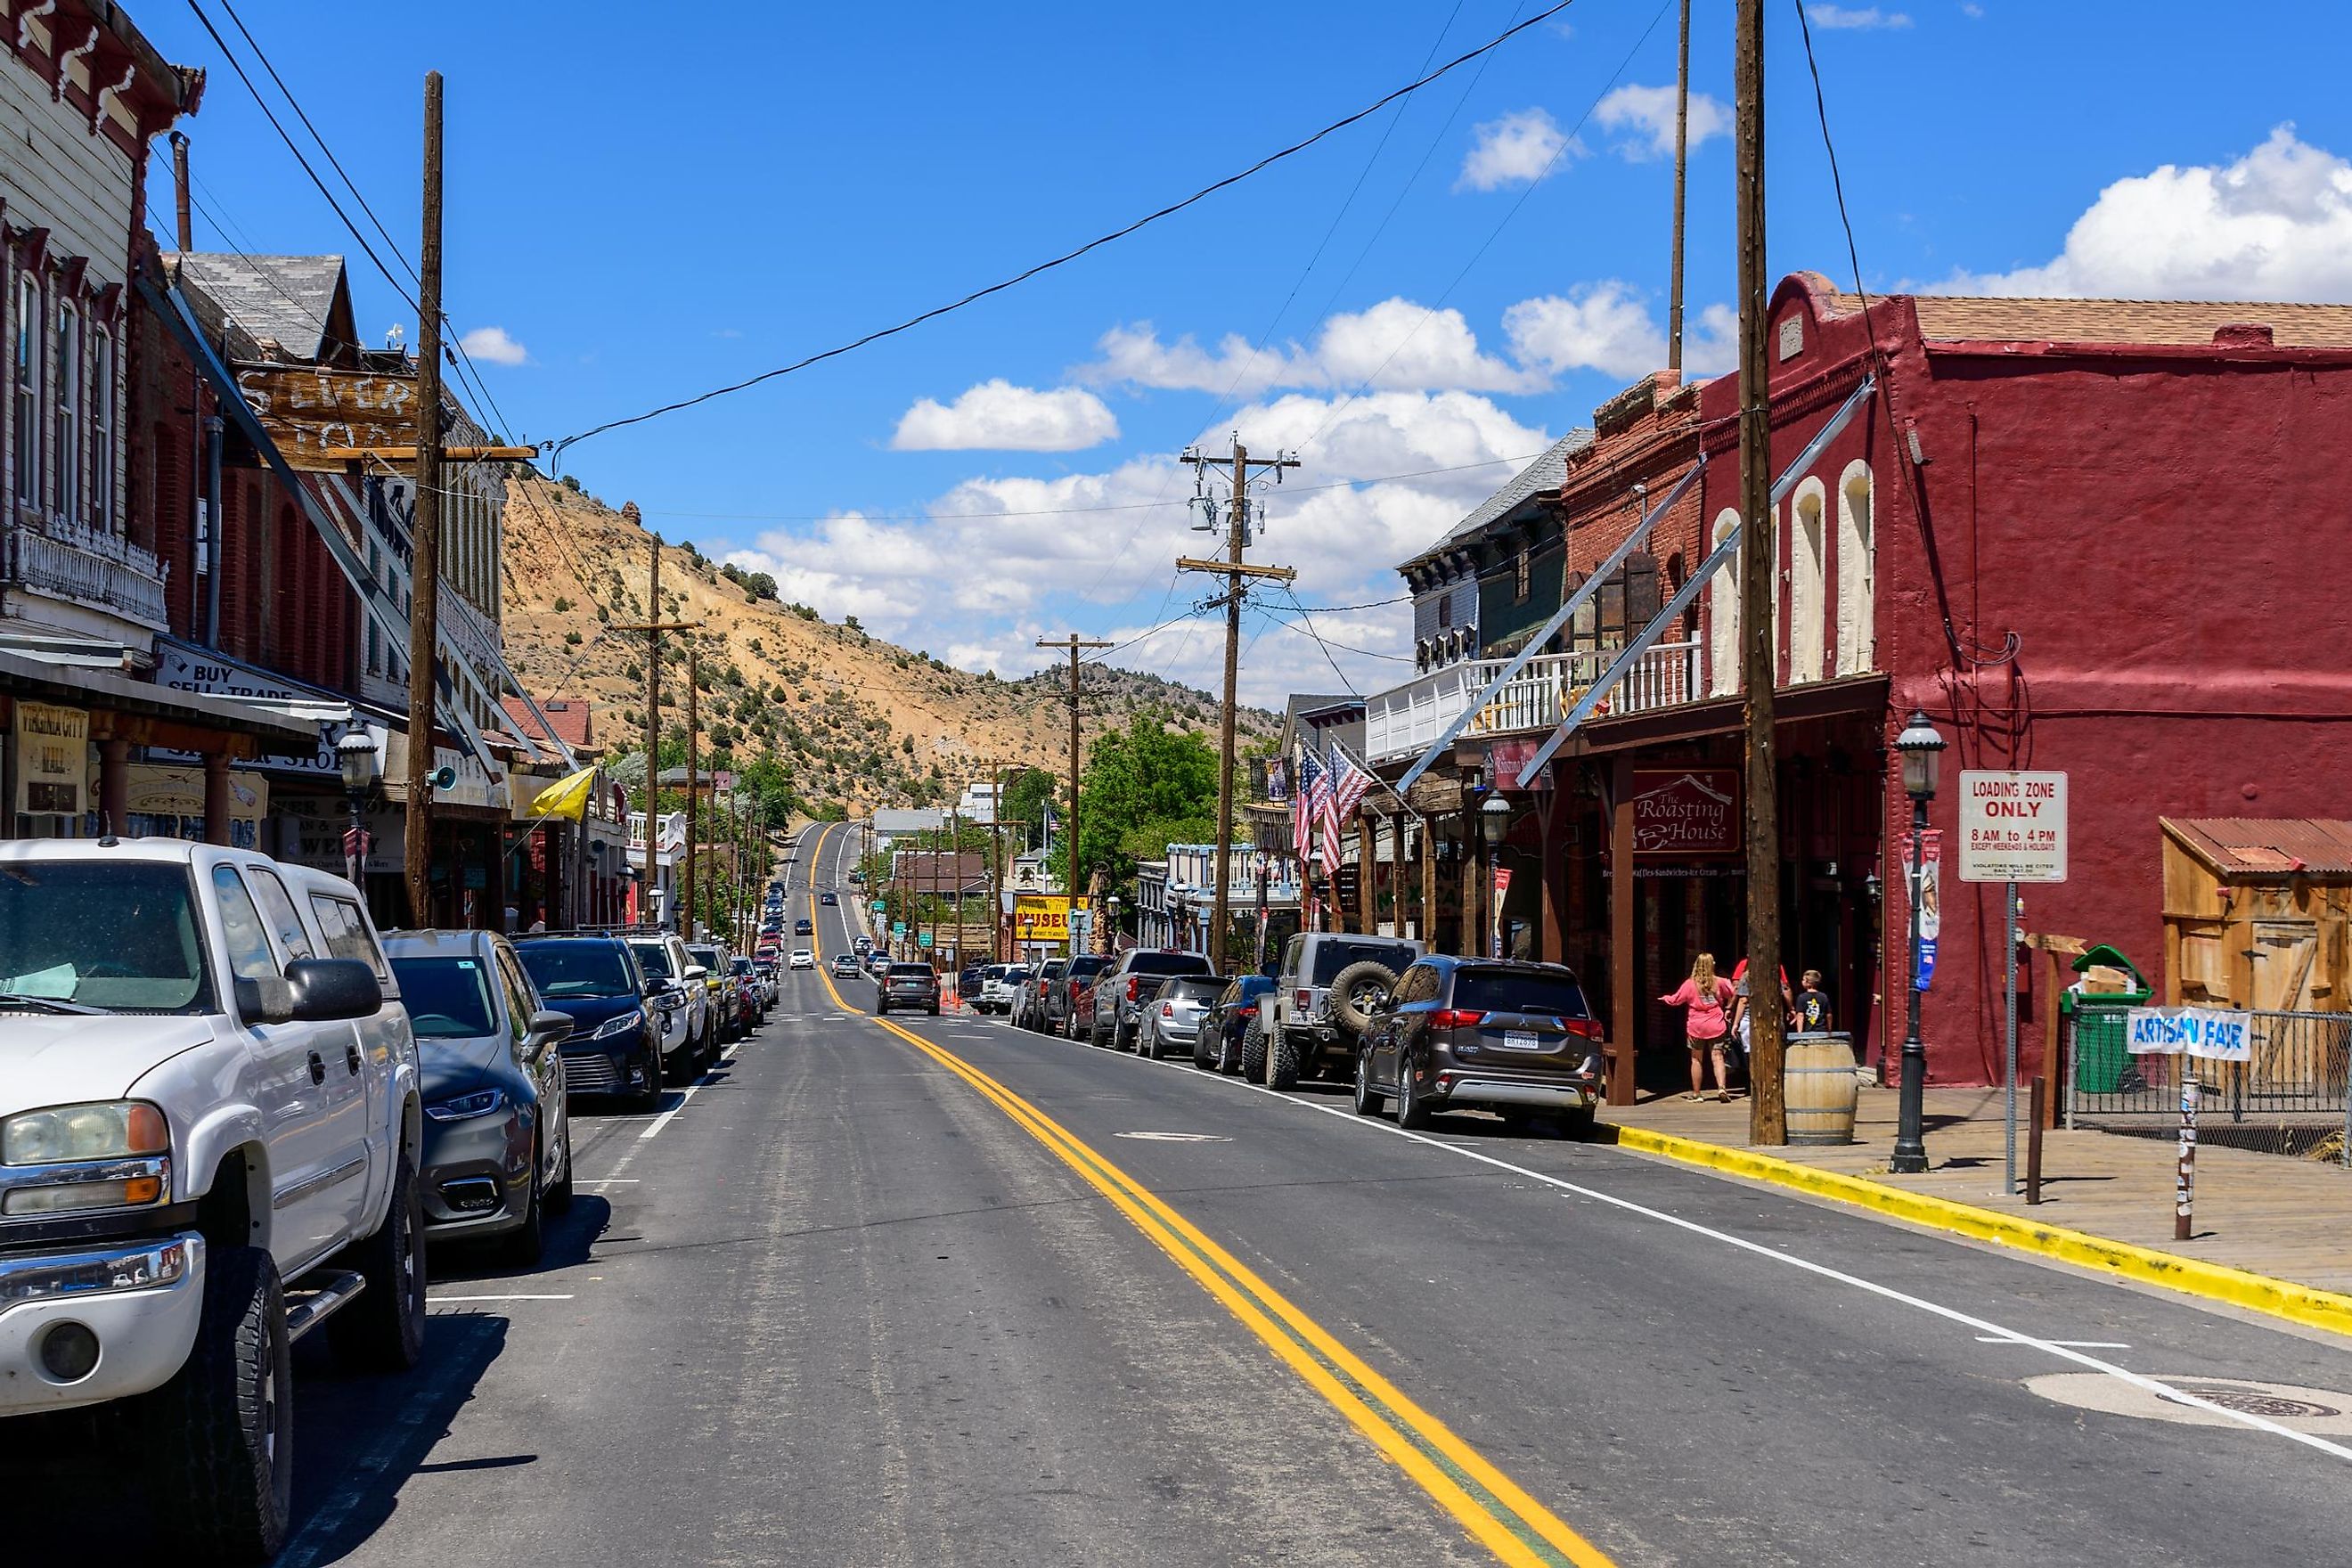 Victorian building on Main C Street in downtown Virginia City with cars parked along the roadside, Nevada, USA. Editorial credit: Michael Vi / Shutterstock.com